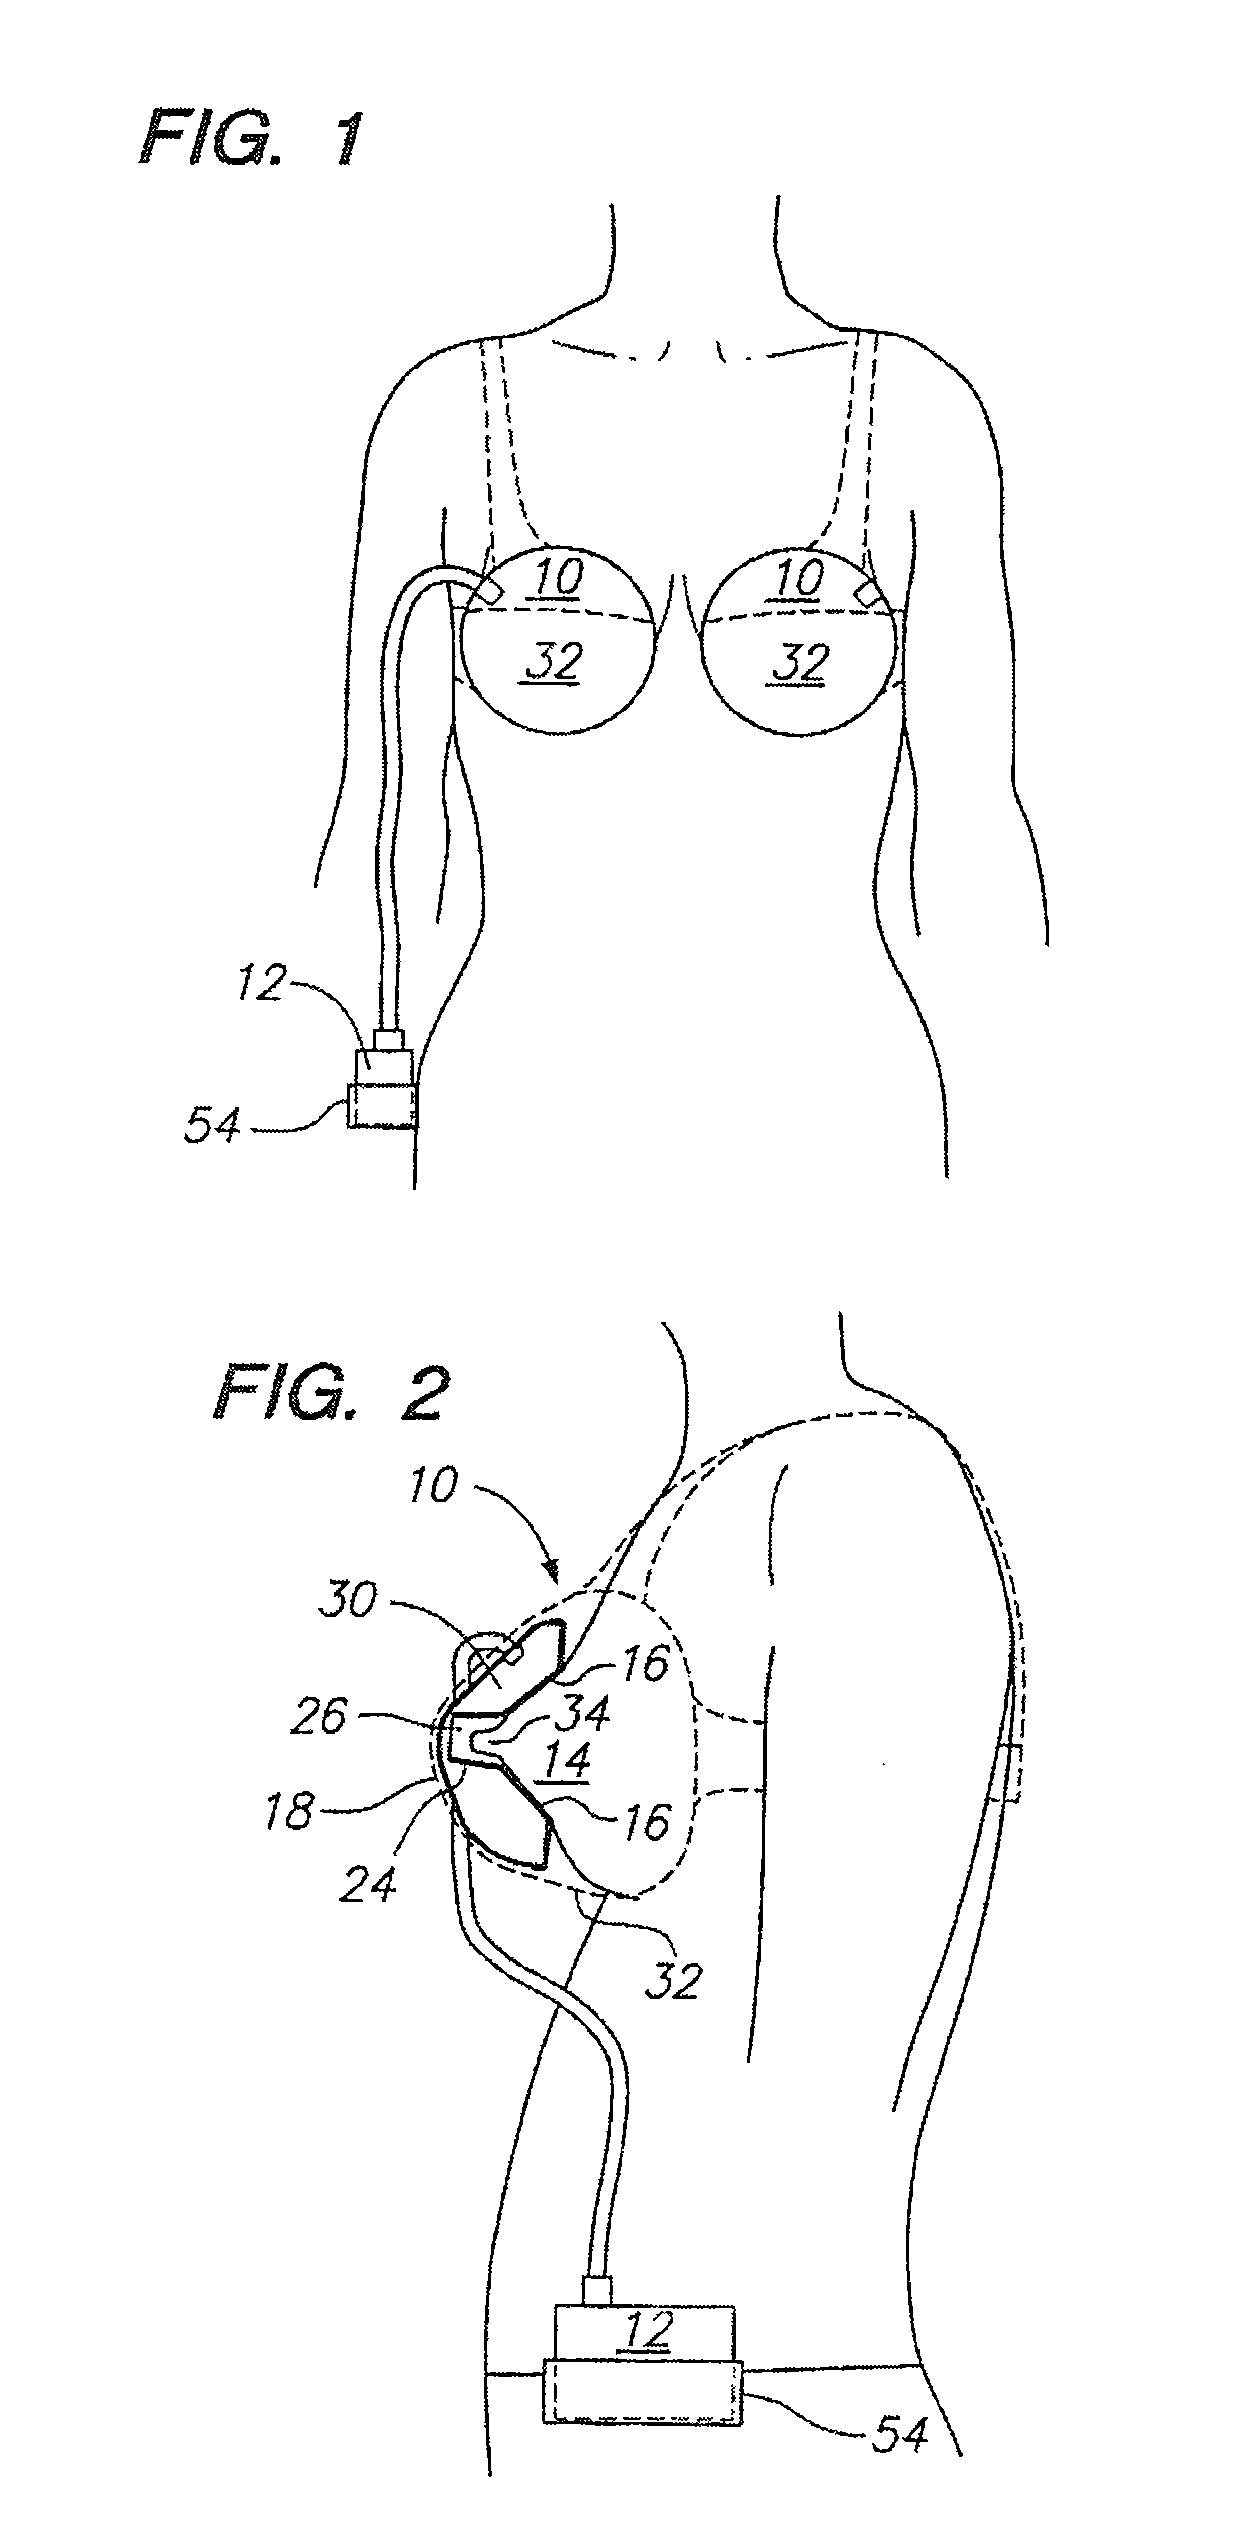 Breast pump device with self-contained breast milk reservoir